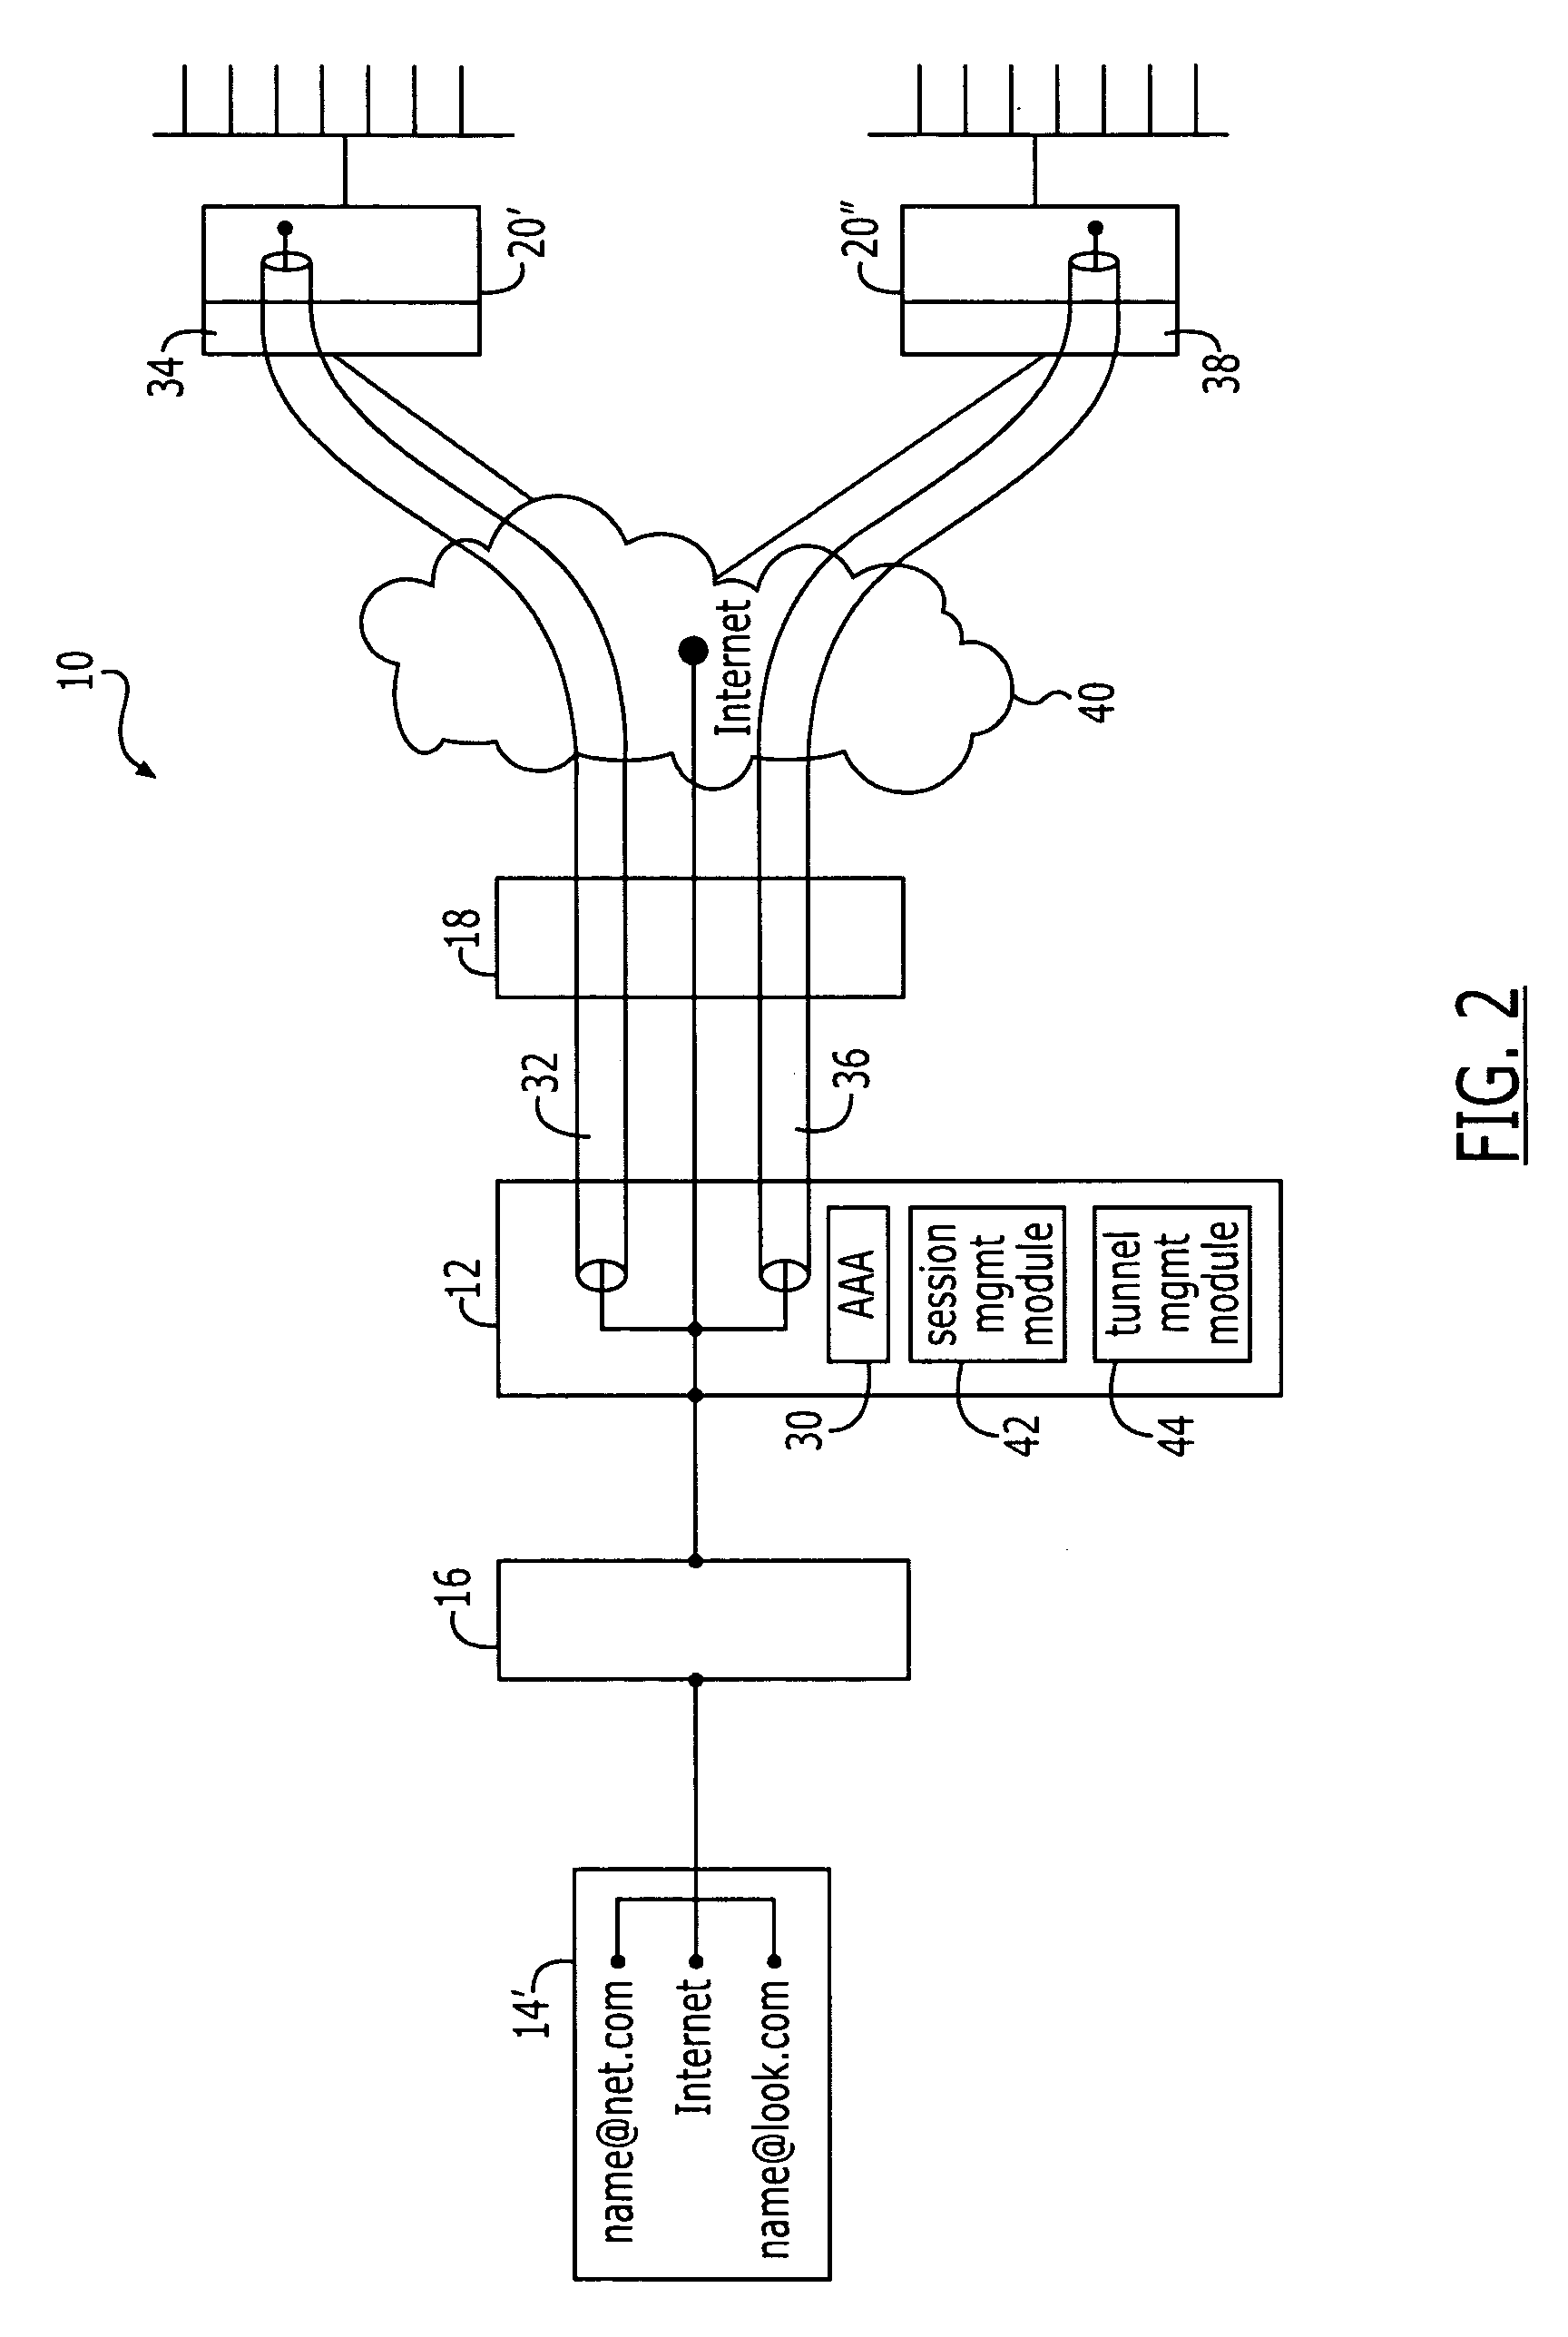 Method and apparatus for establishing dynamic tunnel access sessions in a communication network